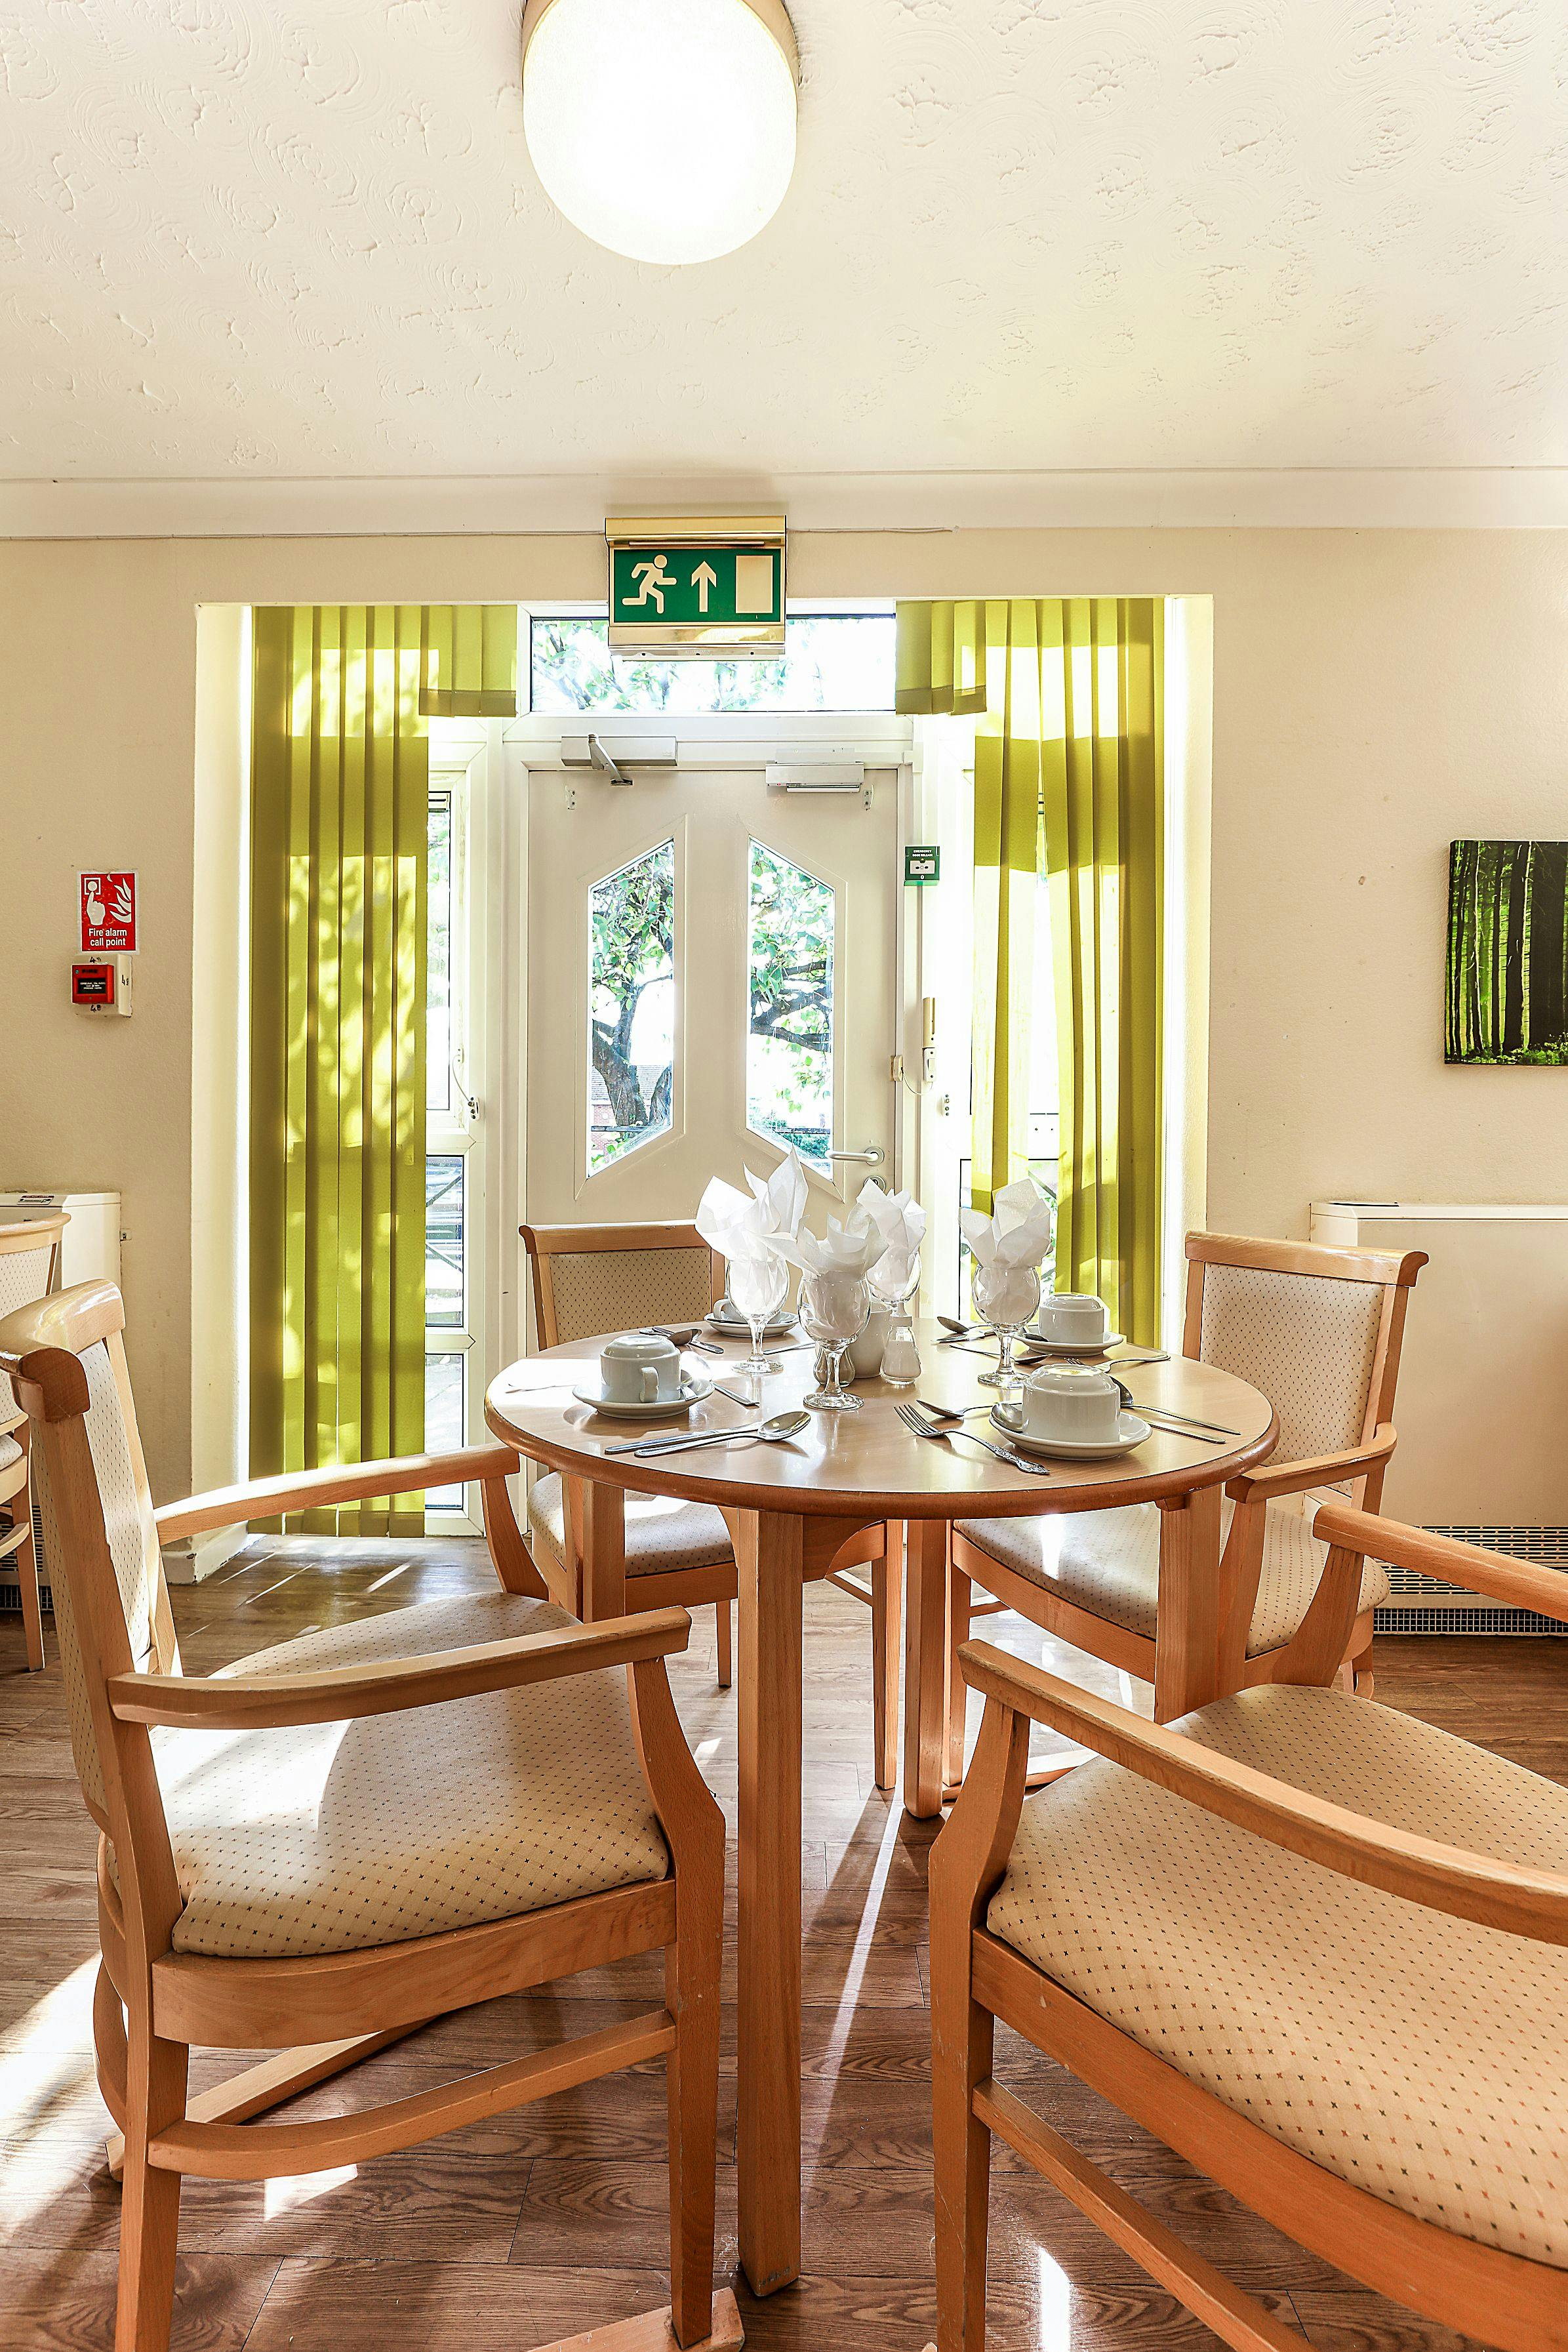 Minster Care Group - Thorley House care home 6